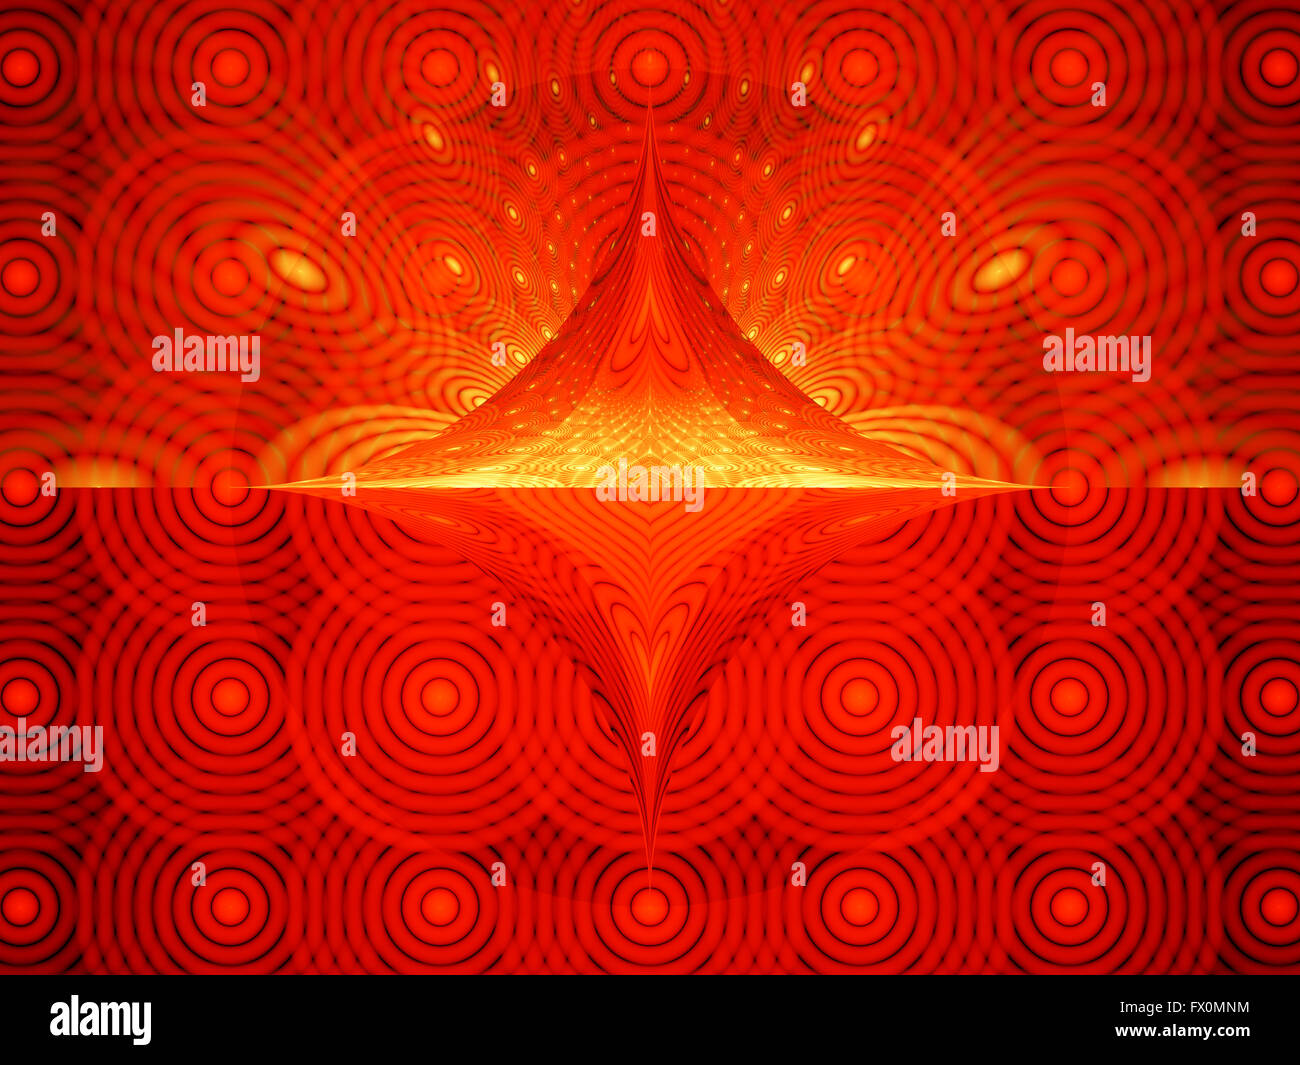 Fiery hypnotic surfaces, computer generated abstract background Stock Photo